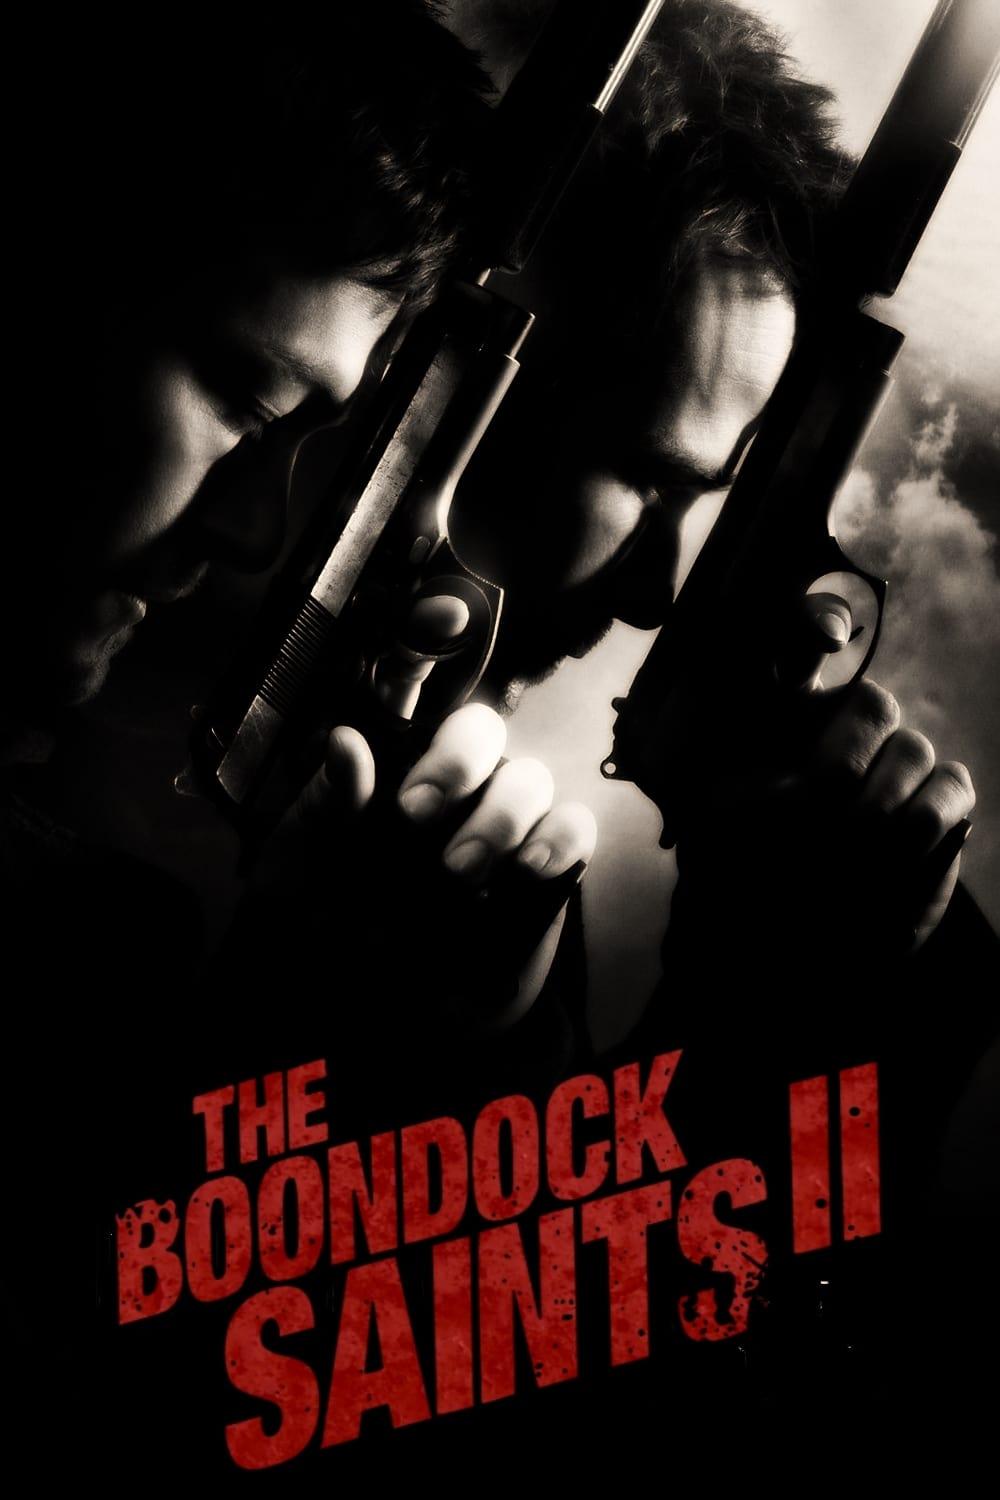 The Boondock Saints II: All Saints Day poster